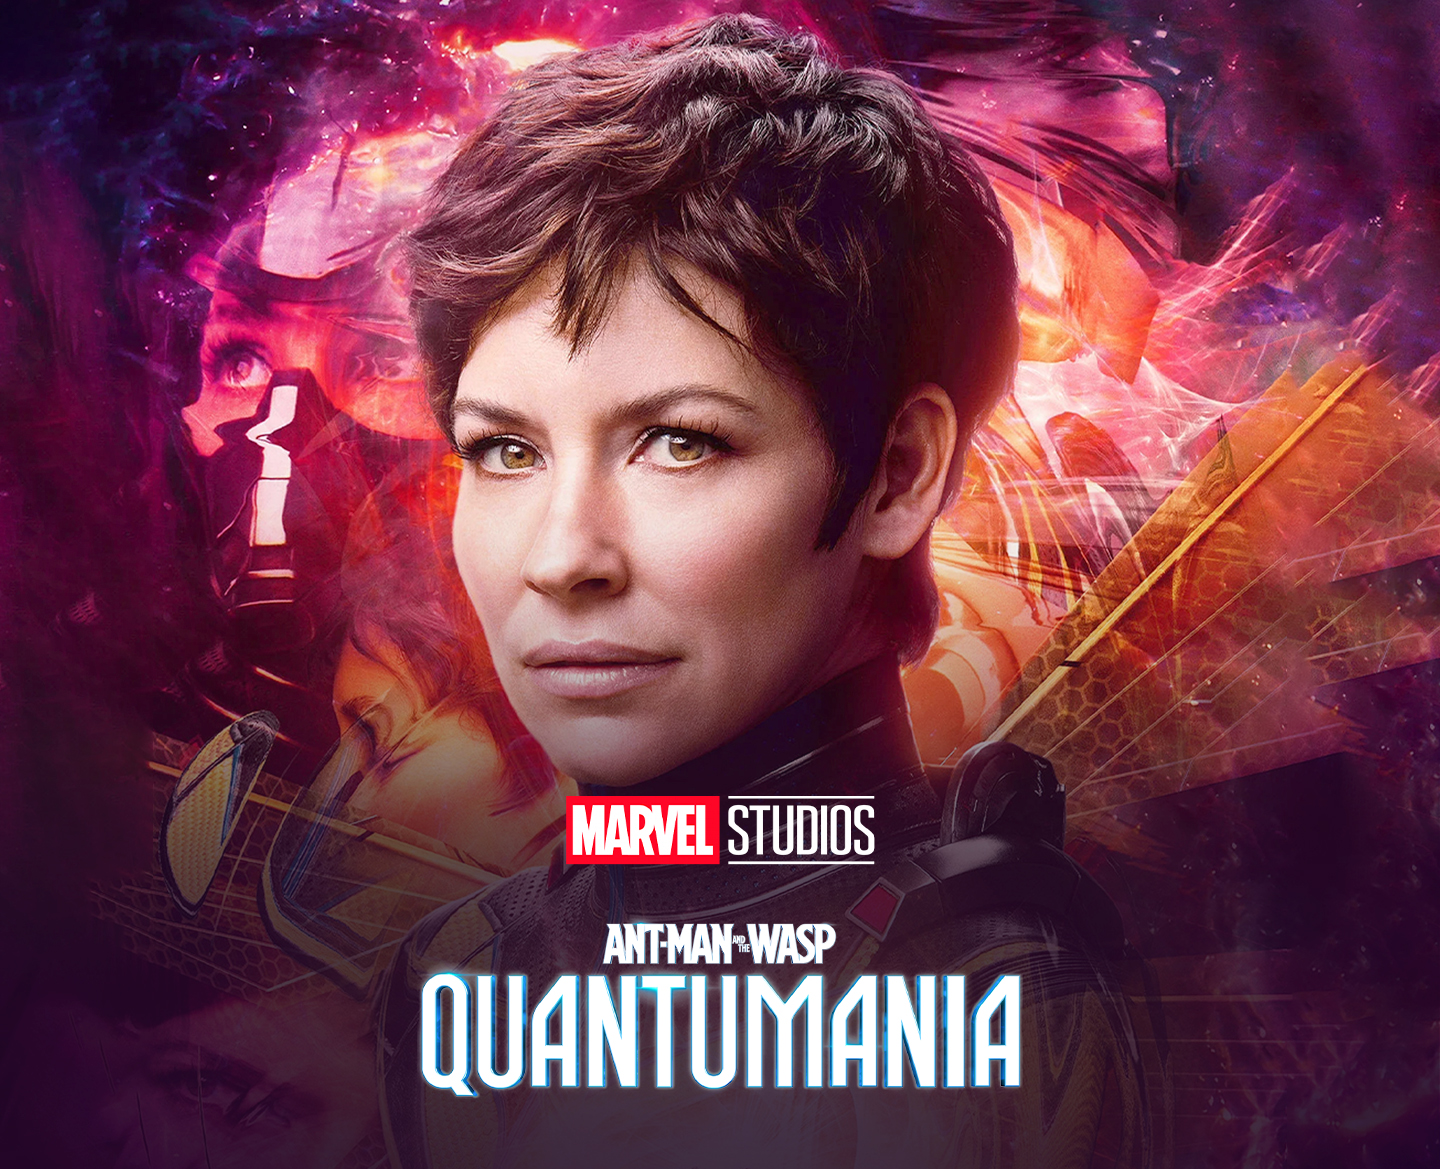 Ant-Man and the Wasp: Quantumania (2023) - Movie